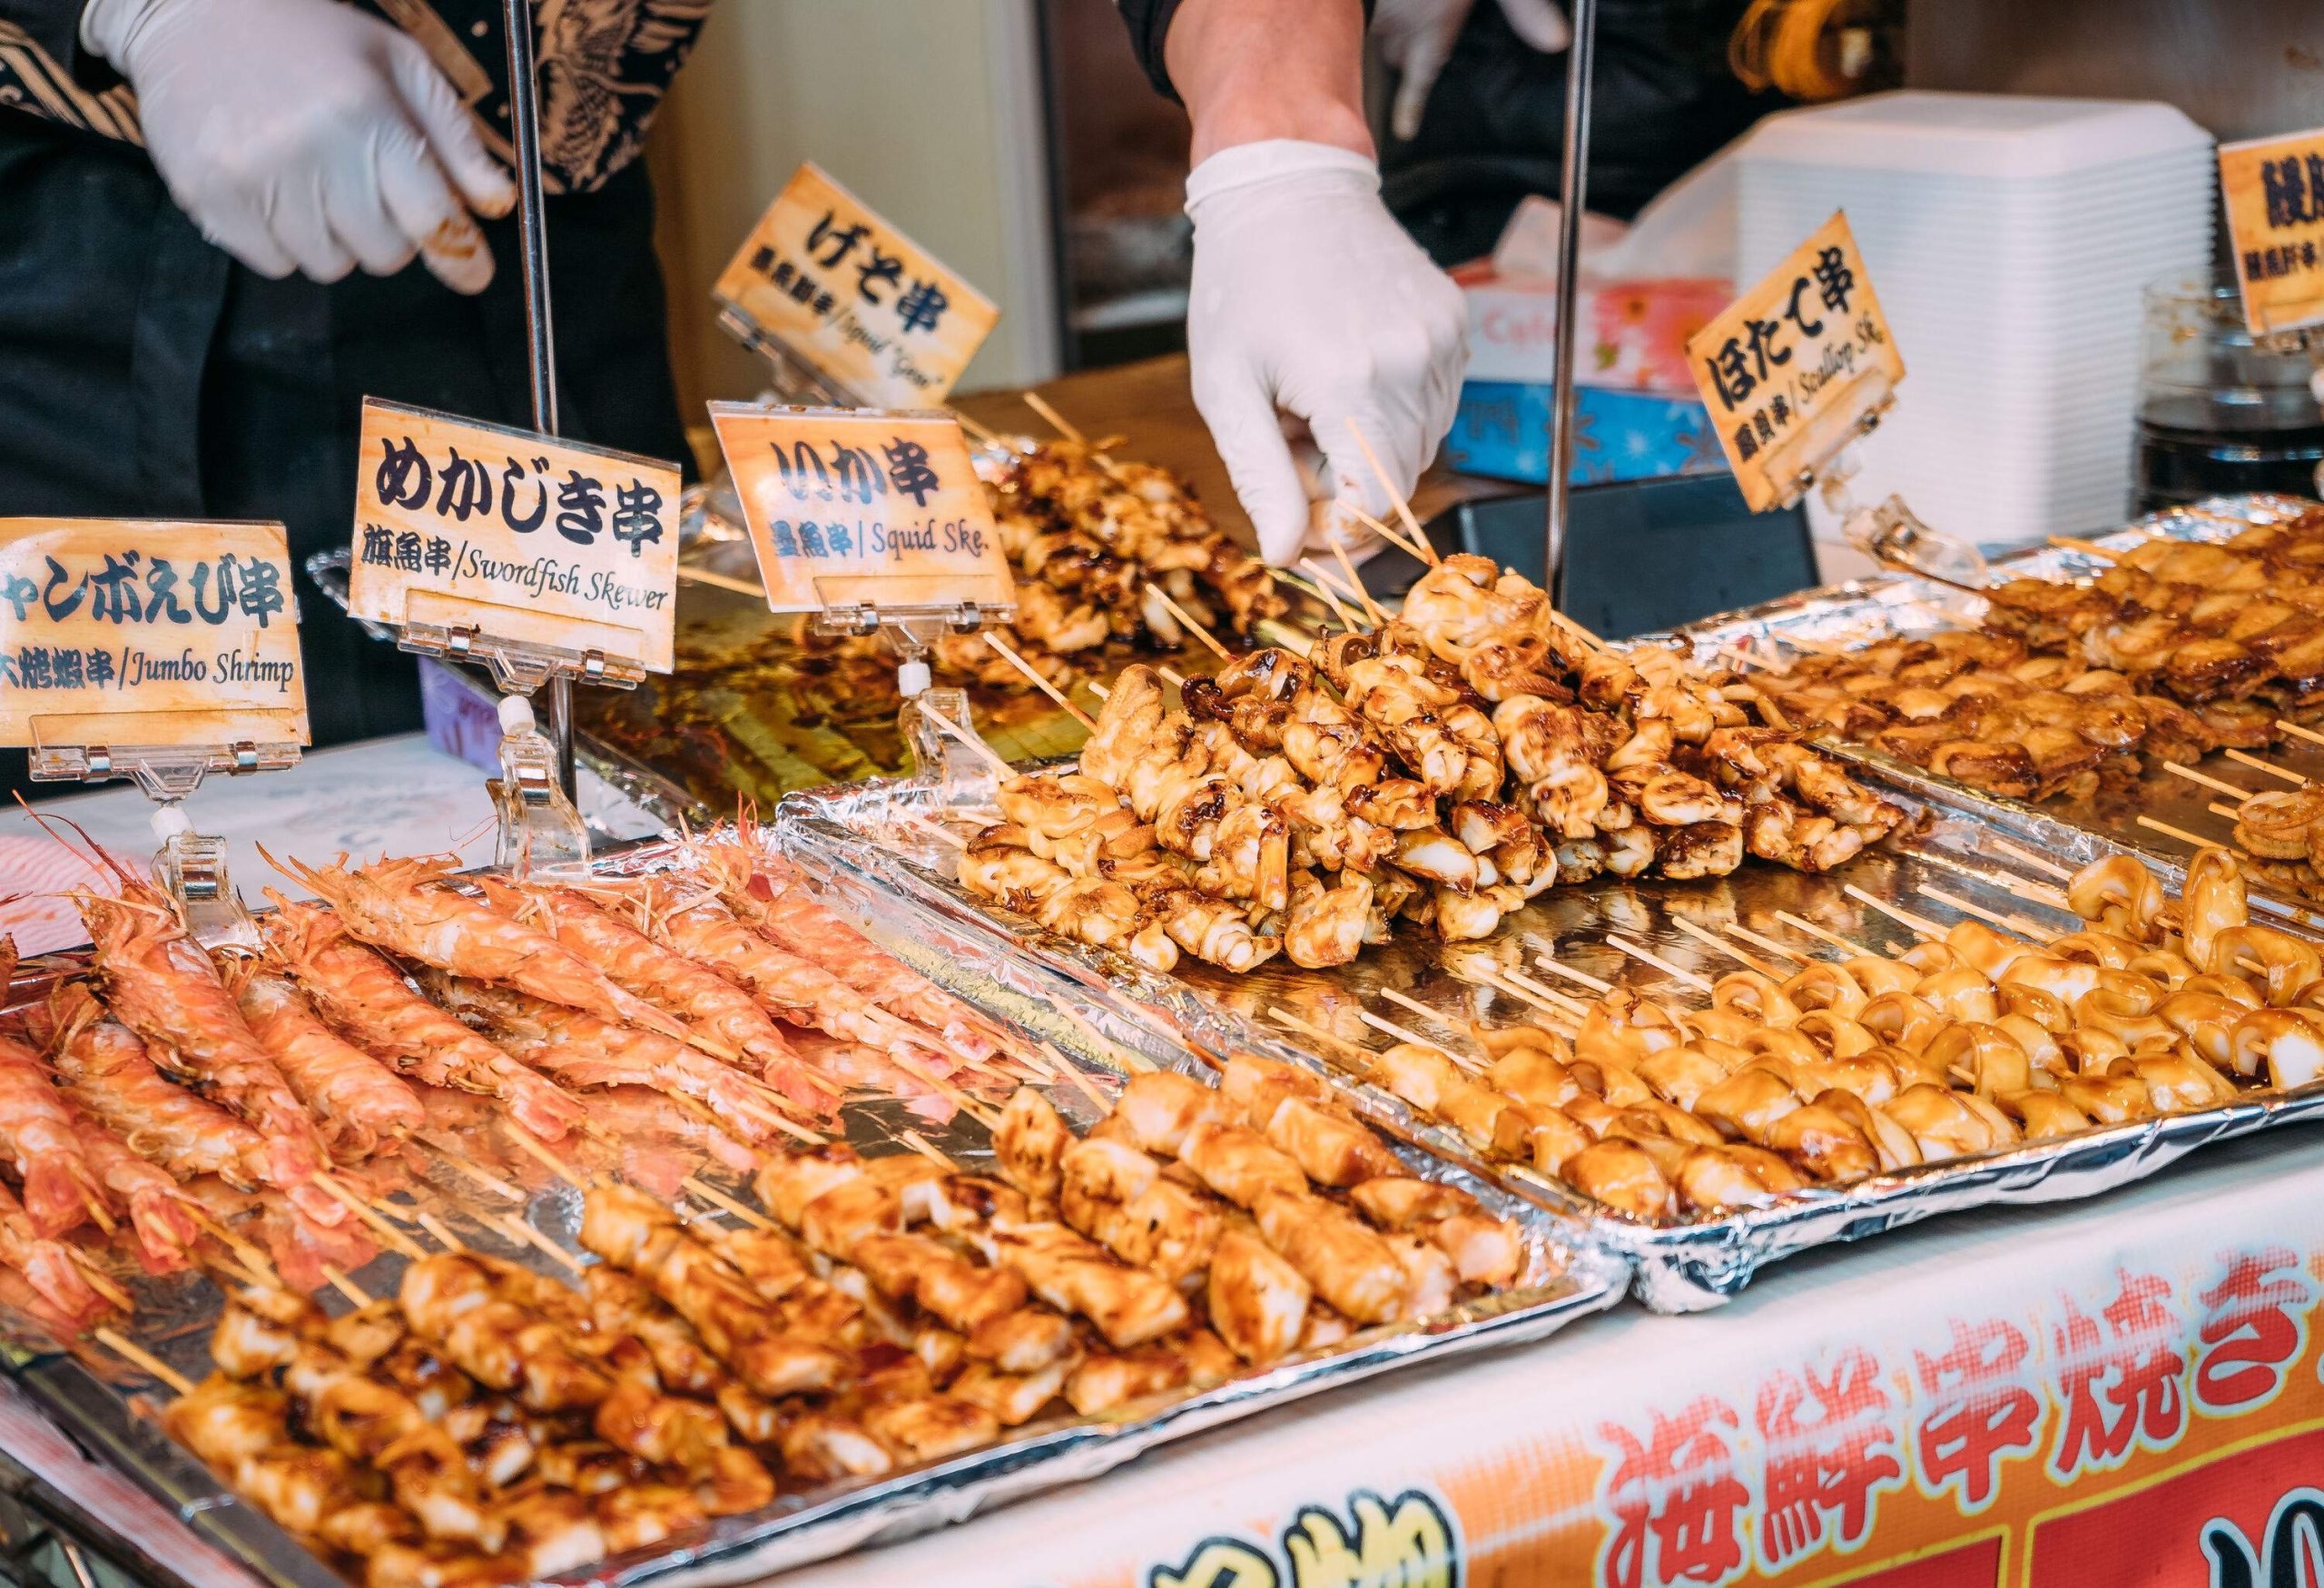 A vendor stall with displays of grilled seafood skewers with labels.